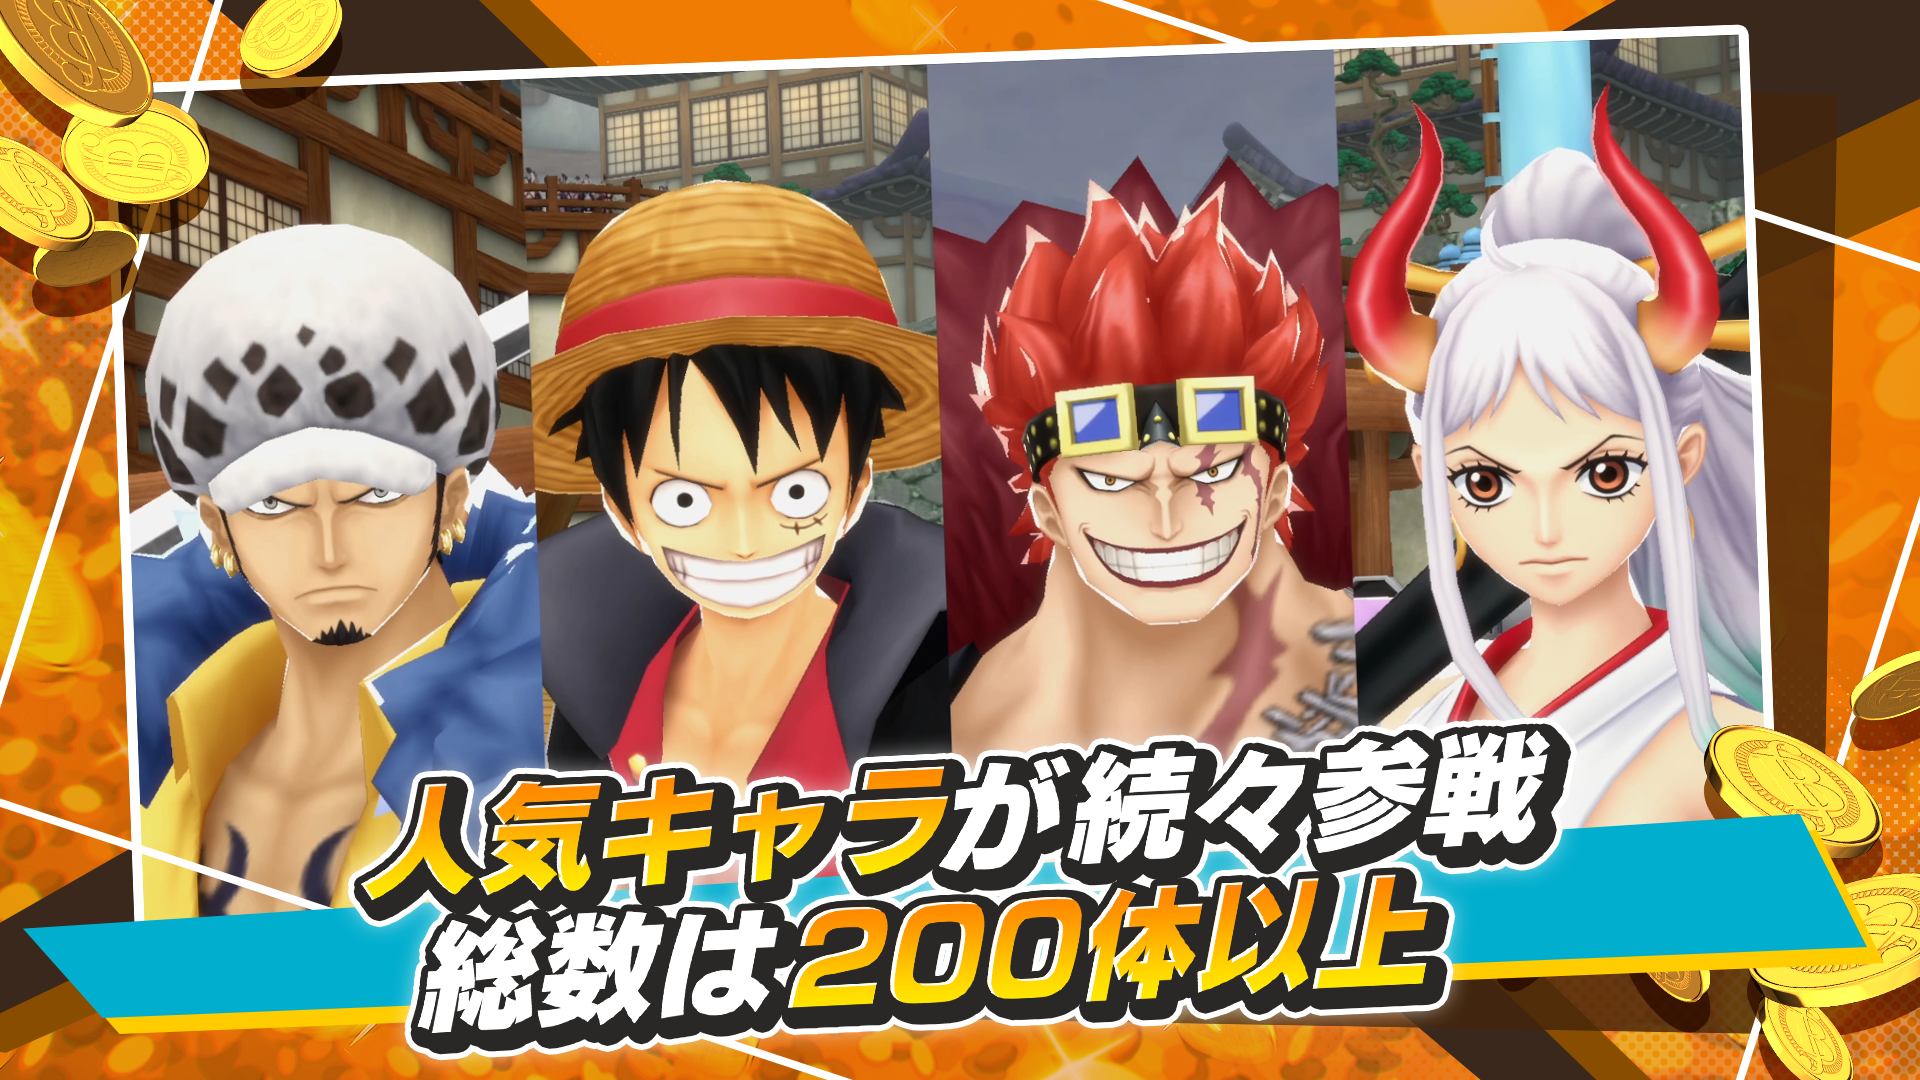 One Piece Bounty Rush - Gear 5 luffy is HACKING 